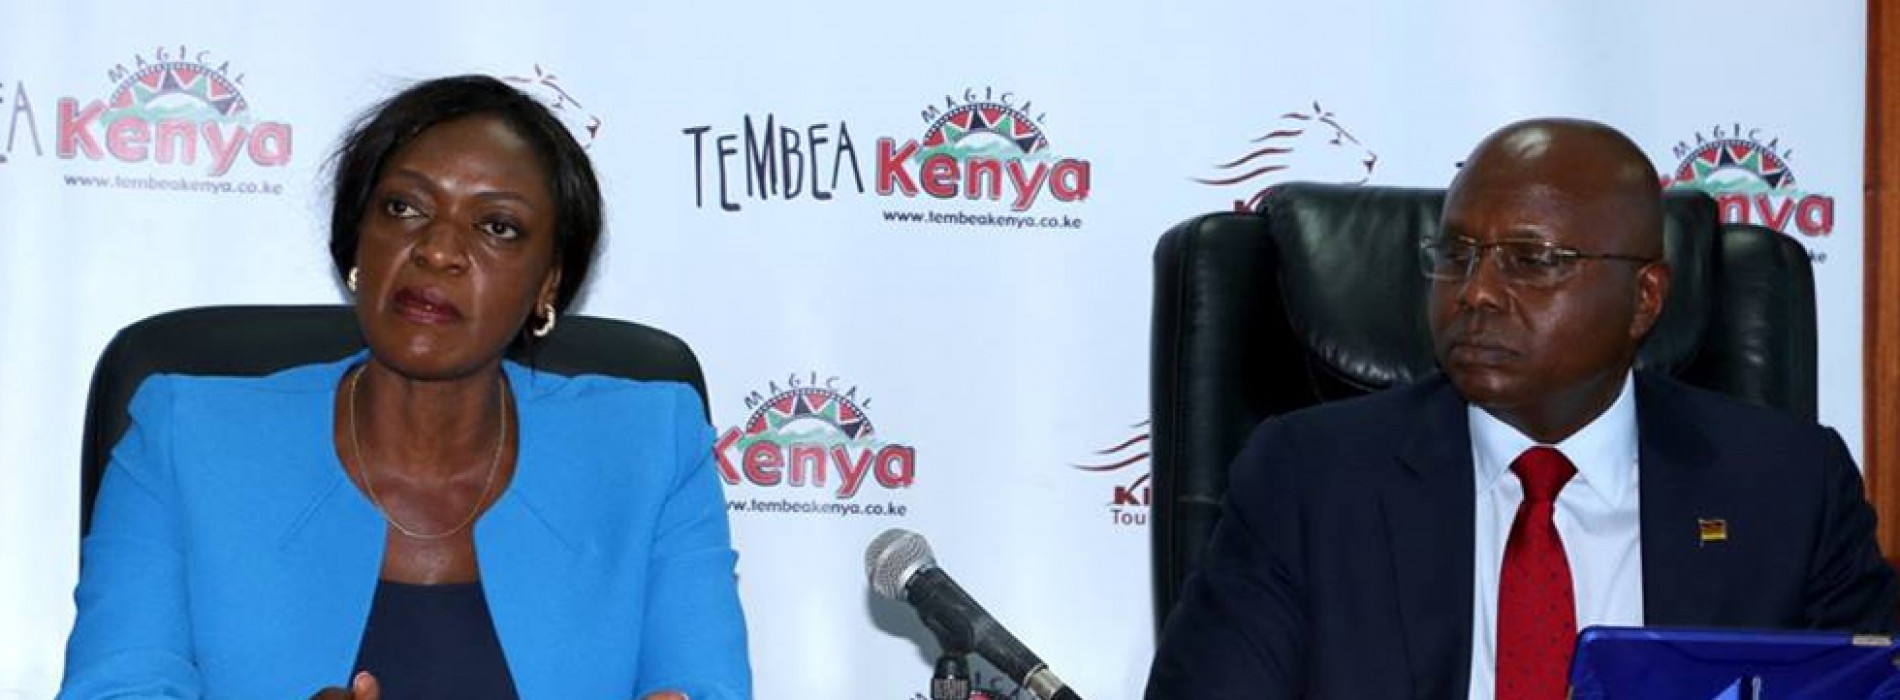 Kenya Tourism Board officially appoints new CEO, Dr. Betty Radier